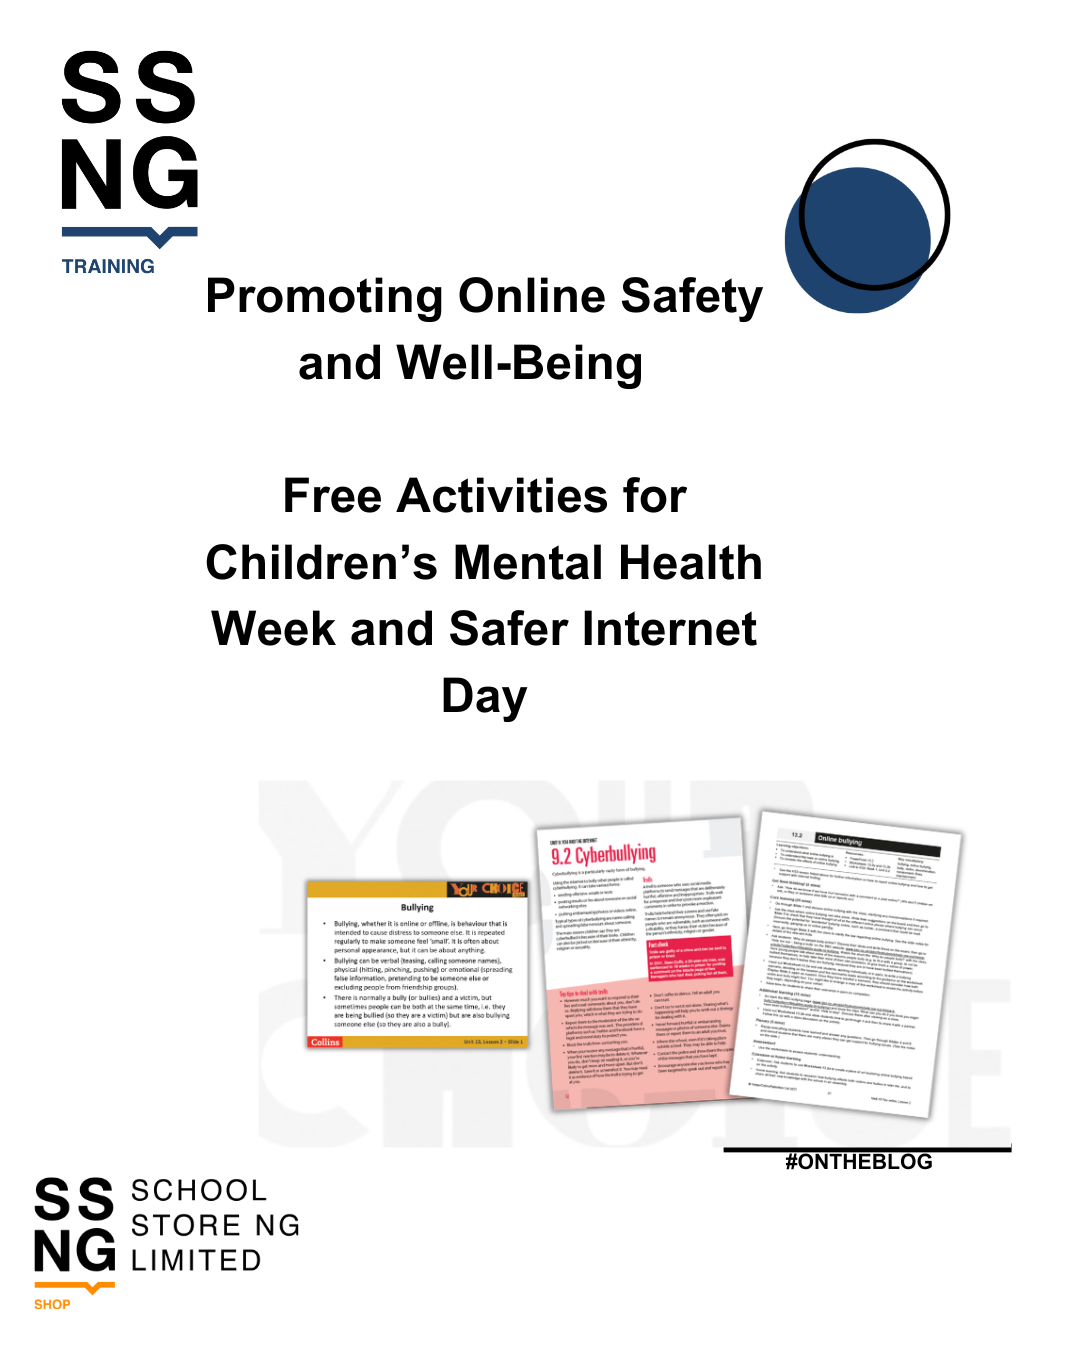 https://www.schoolstoreng.com/storage/photos/Blog Posts/Promoting Online Safety and WellBeing Free Activities for Children's Mental Health Week and Safer Internet Day (2).png